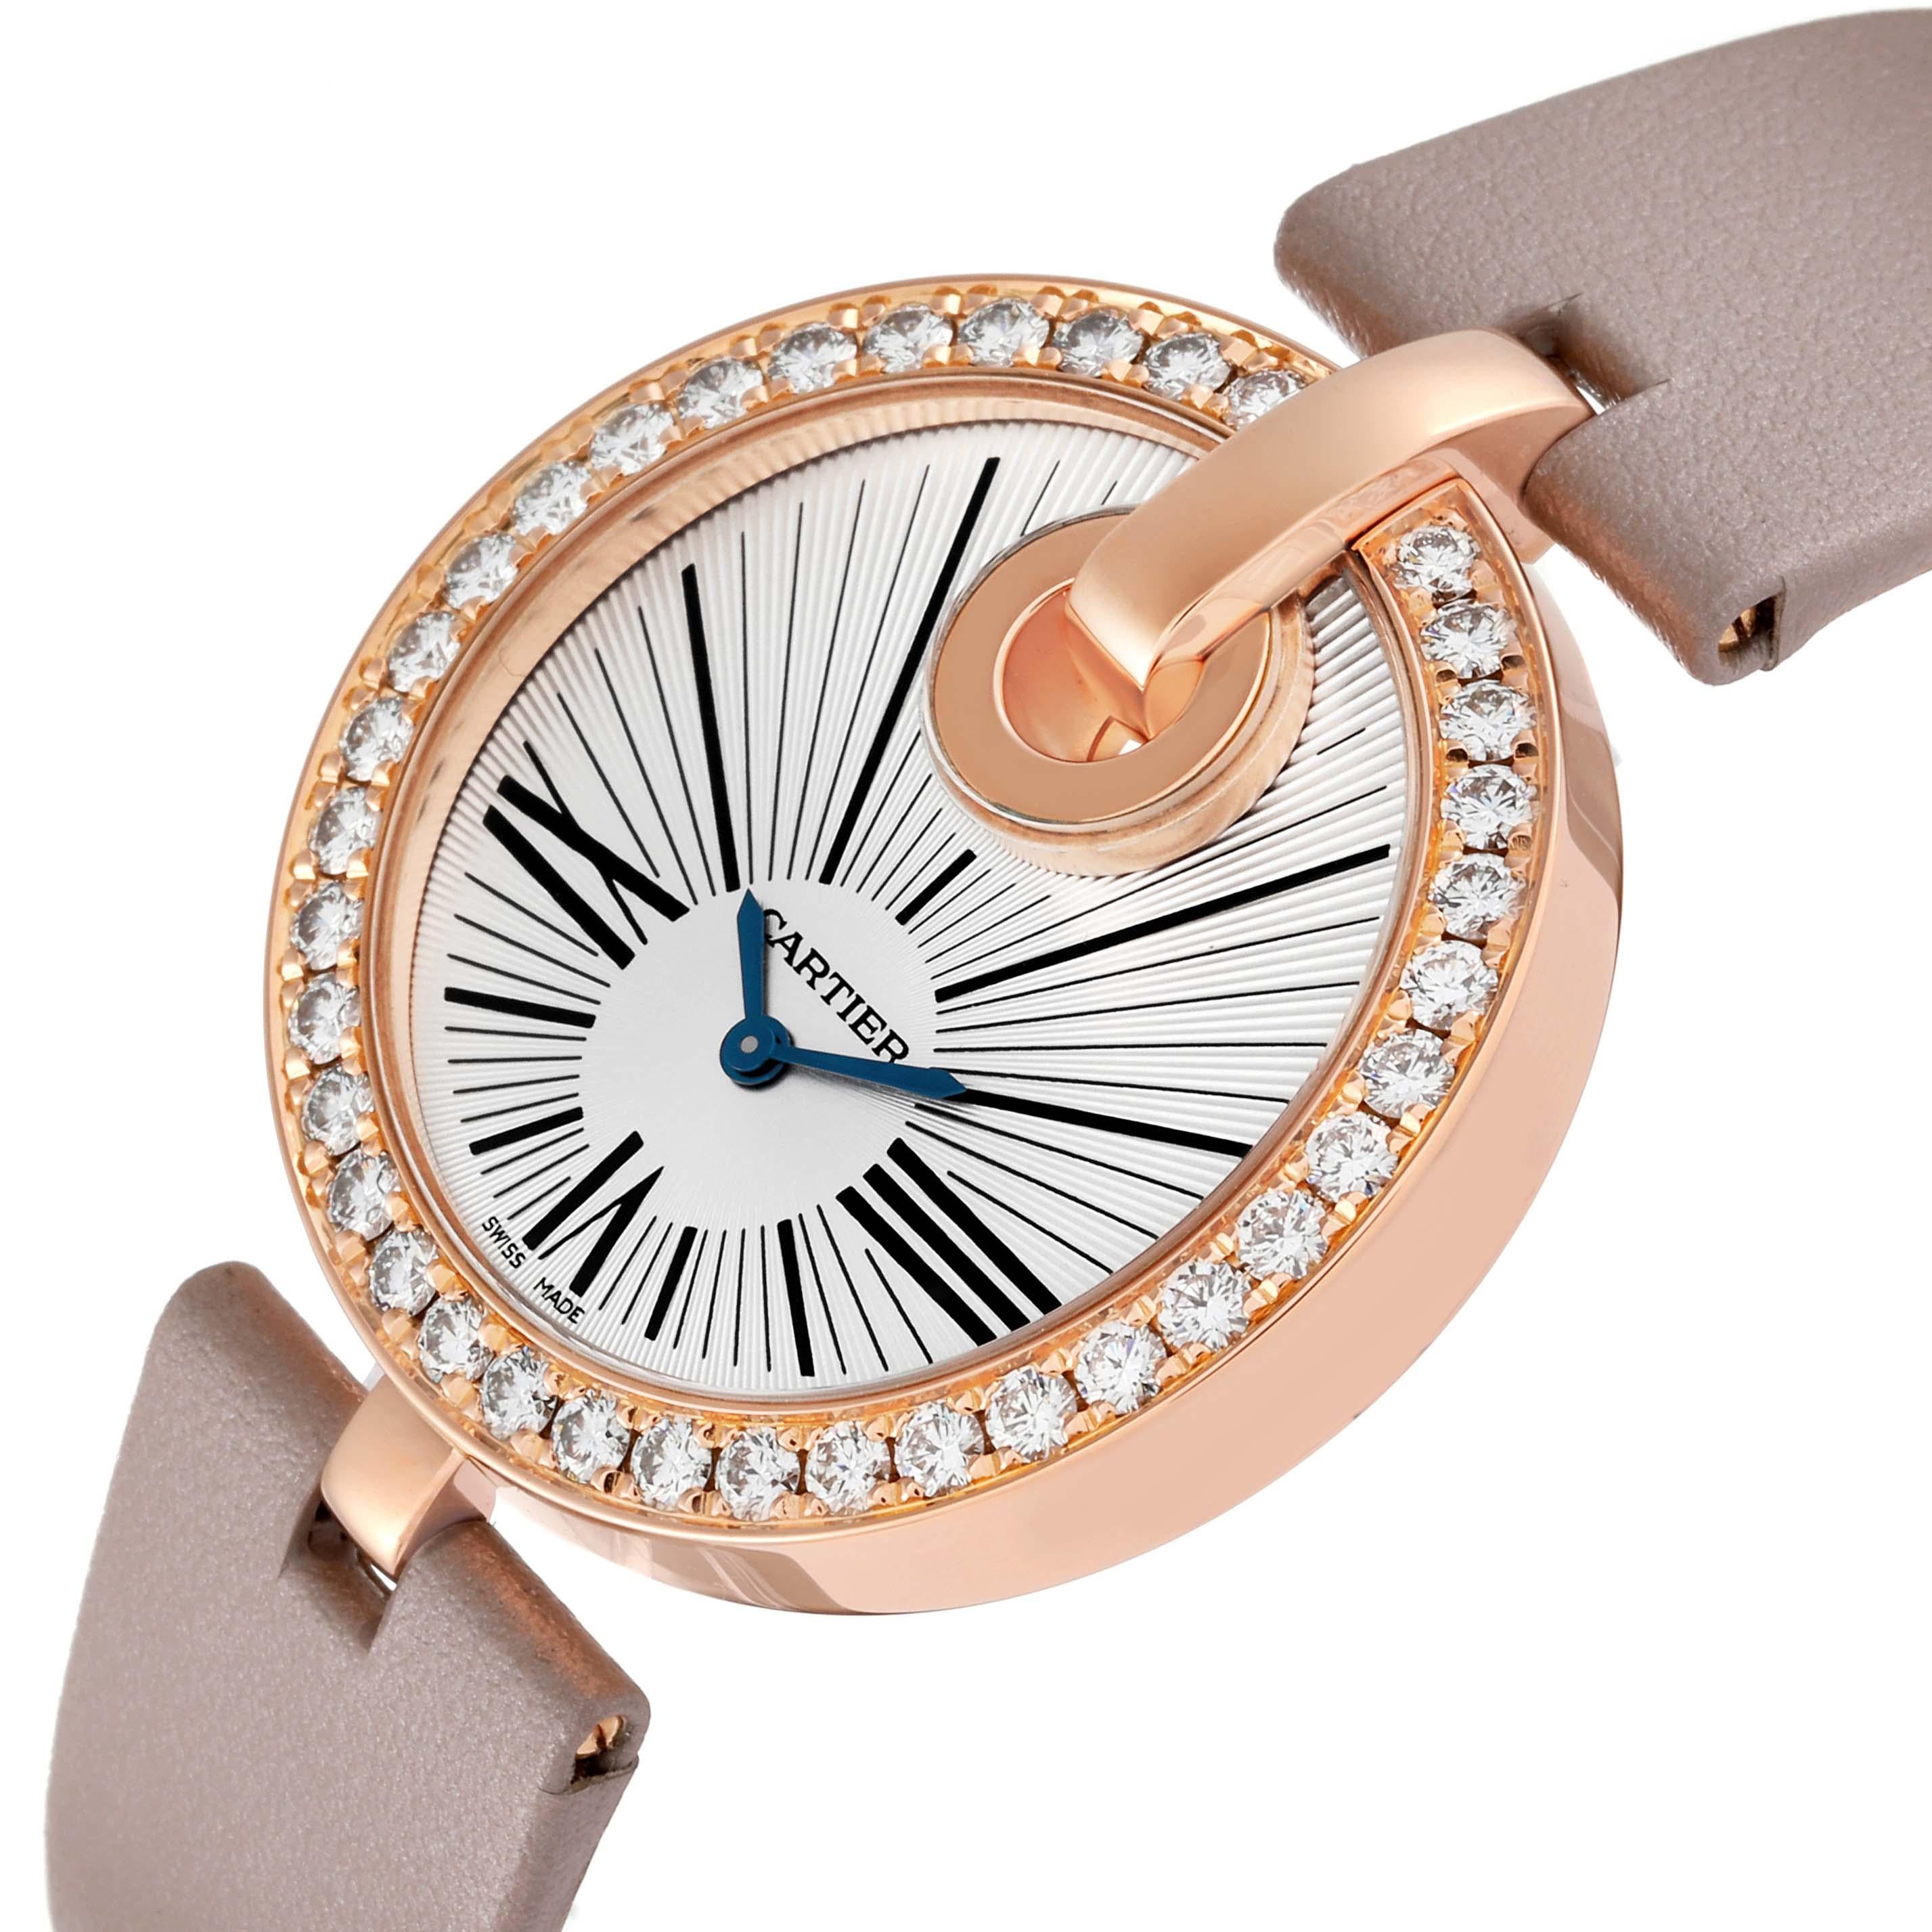 Cartier Captive Rose Gold Diamond Ladies Watch WG600011 For Sale 1